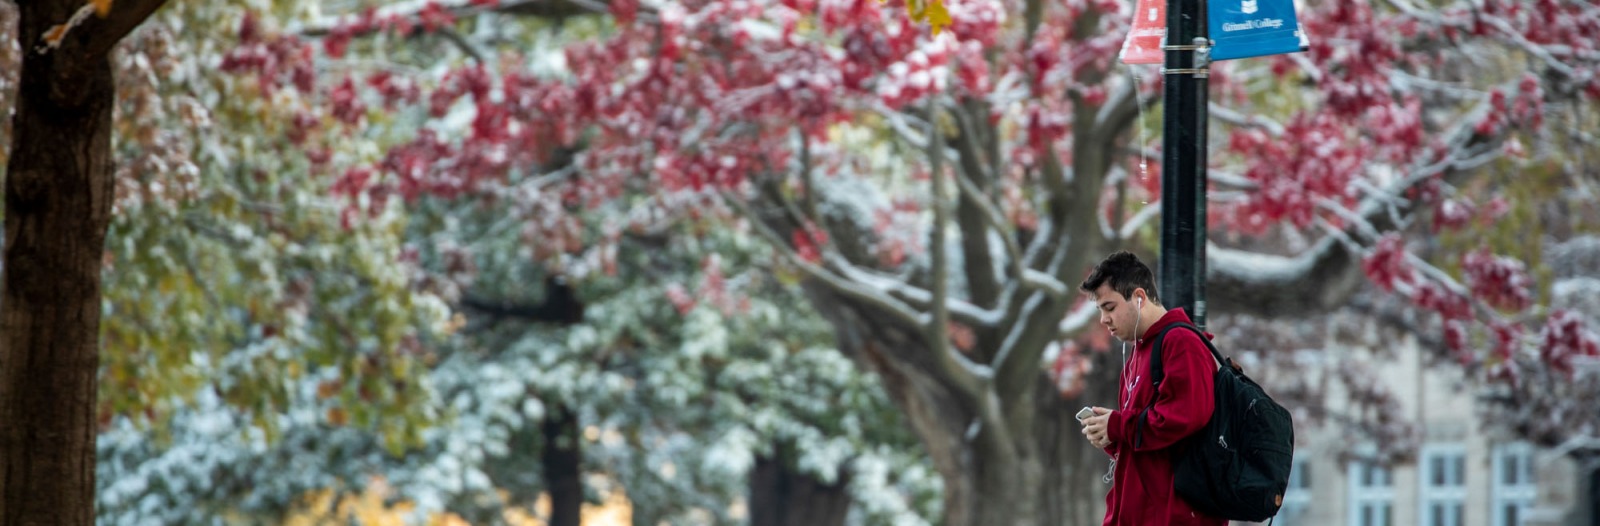 student walks on campus with light dusting of snow